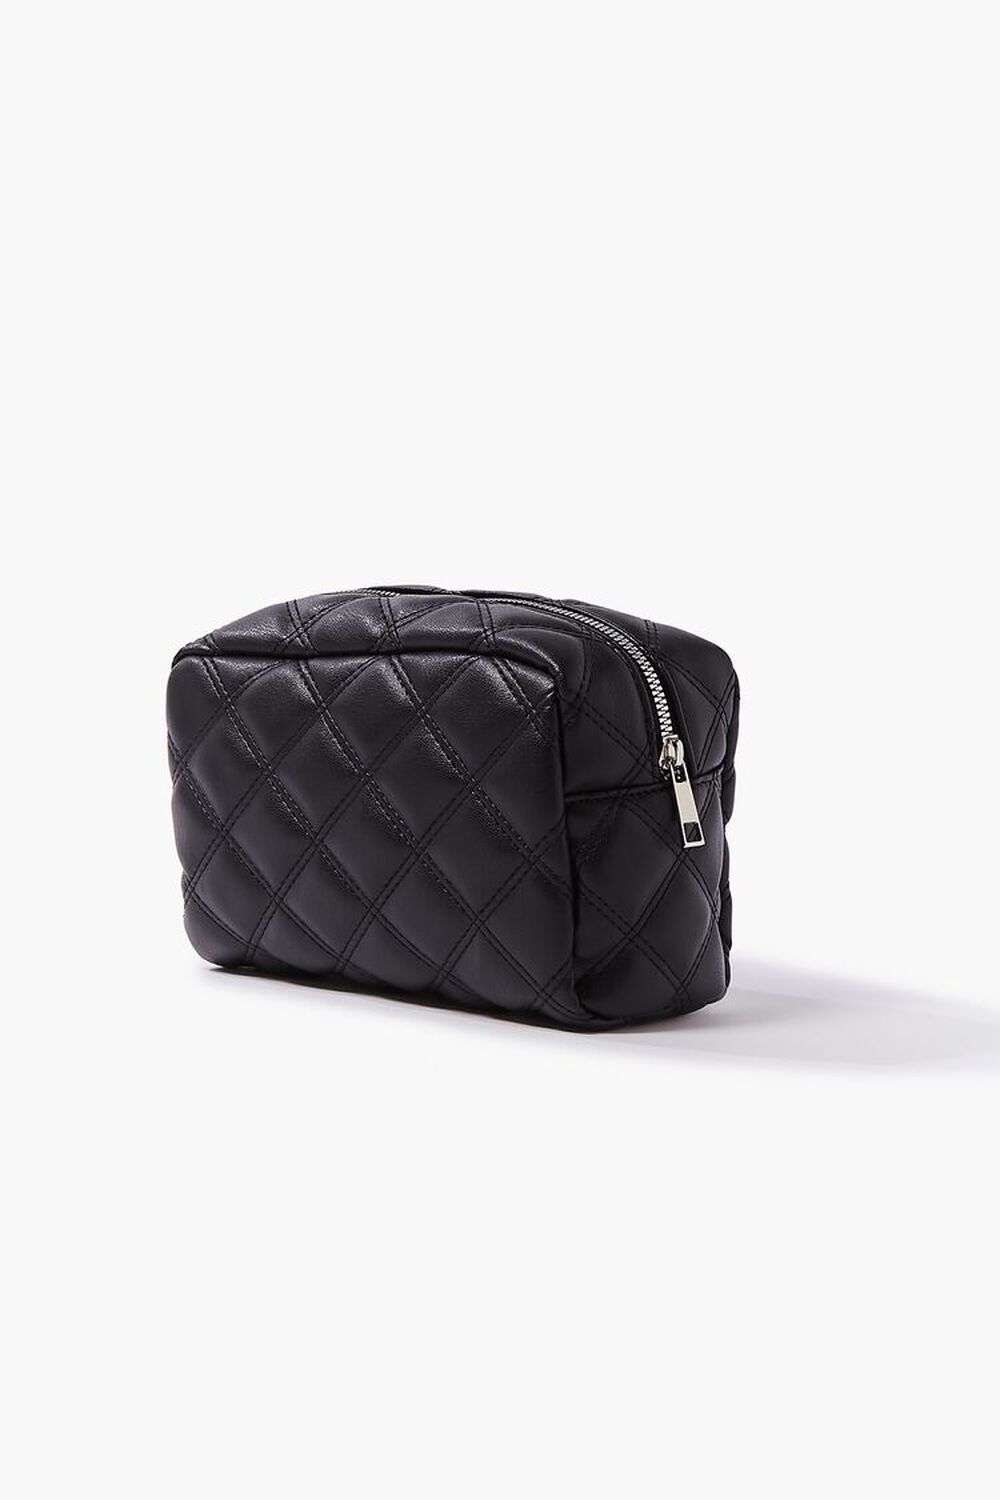 BLACK Quilted Faux Leather Makeup Bag, image 1